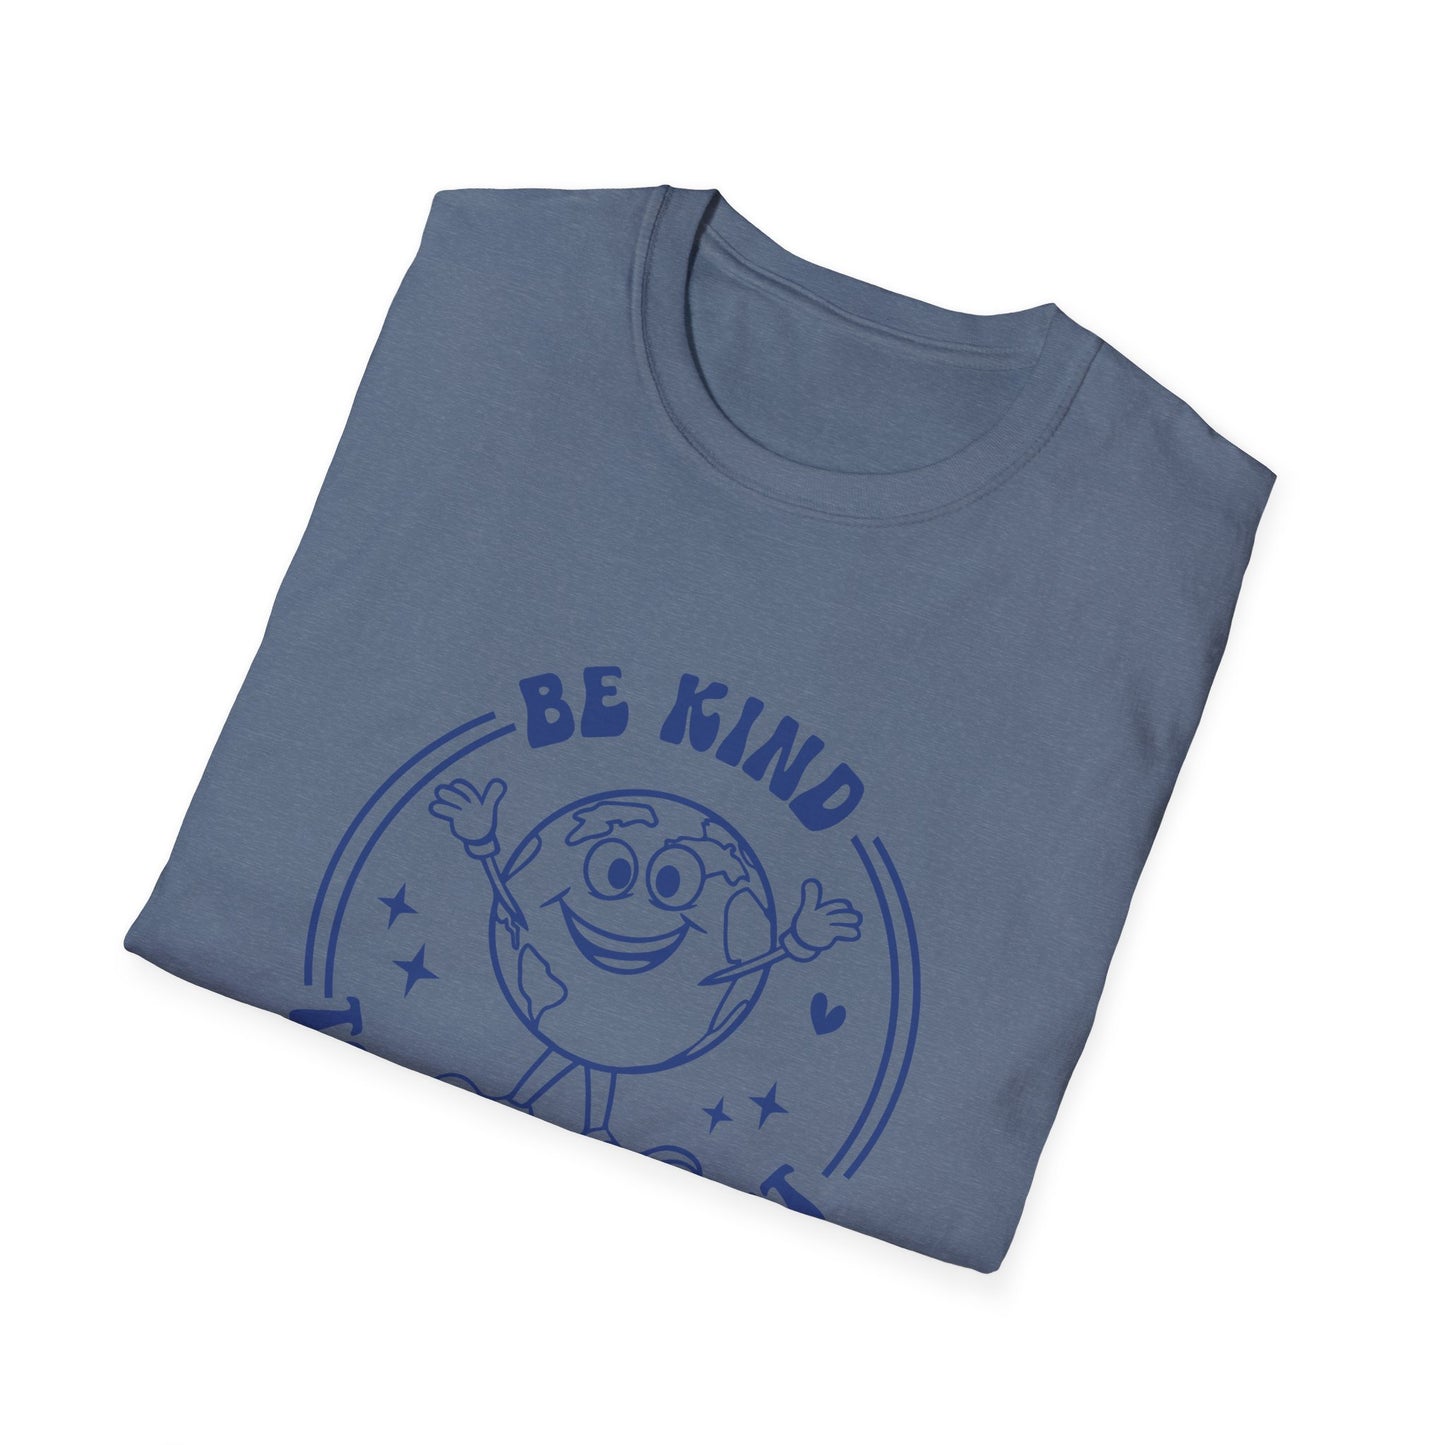 Be Kind To Our Planet Tee